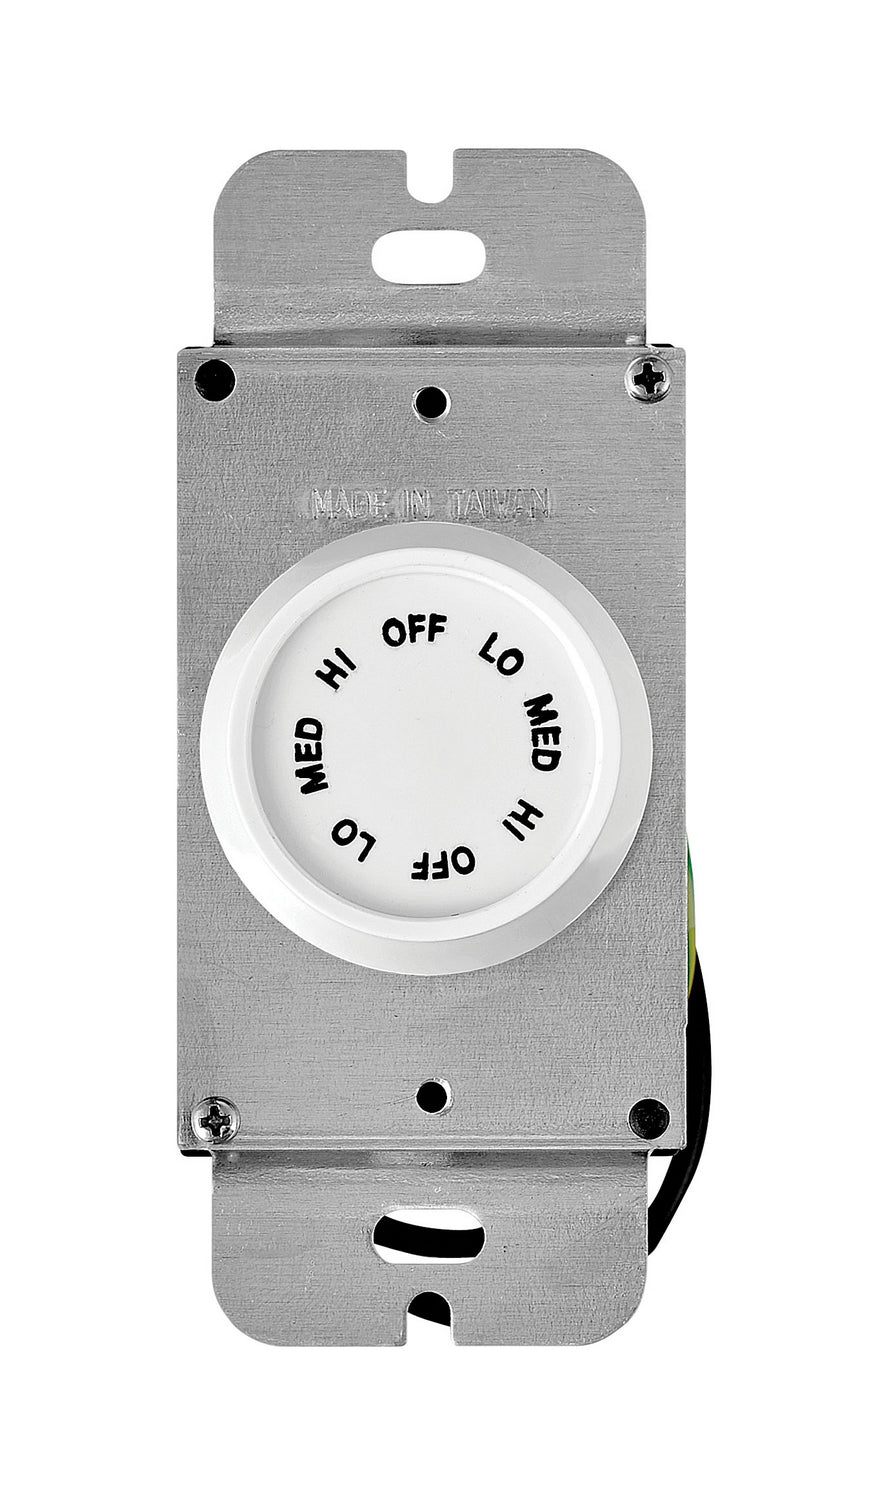 Hinkley Canada - Wall Contol - Wall Control 3 Speed Rotary - Appliance White- Union Lighting Luminaires Decor